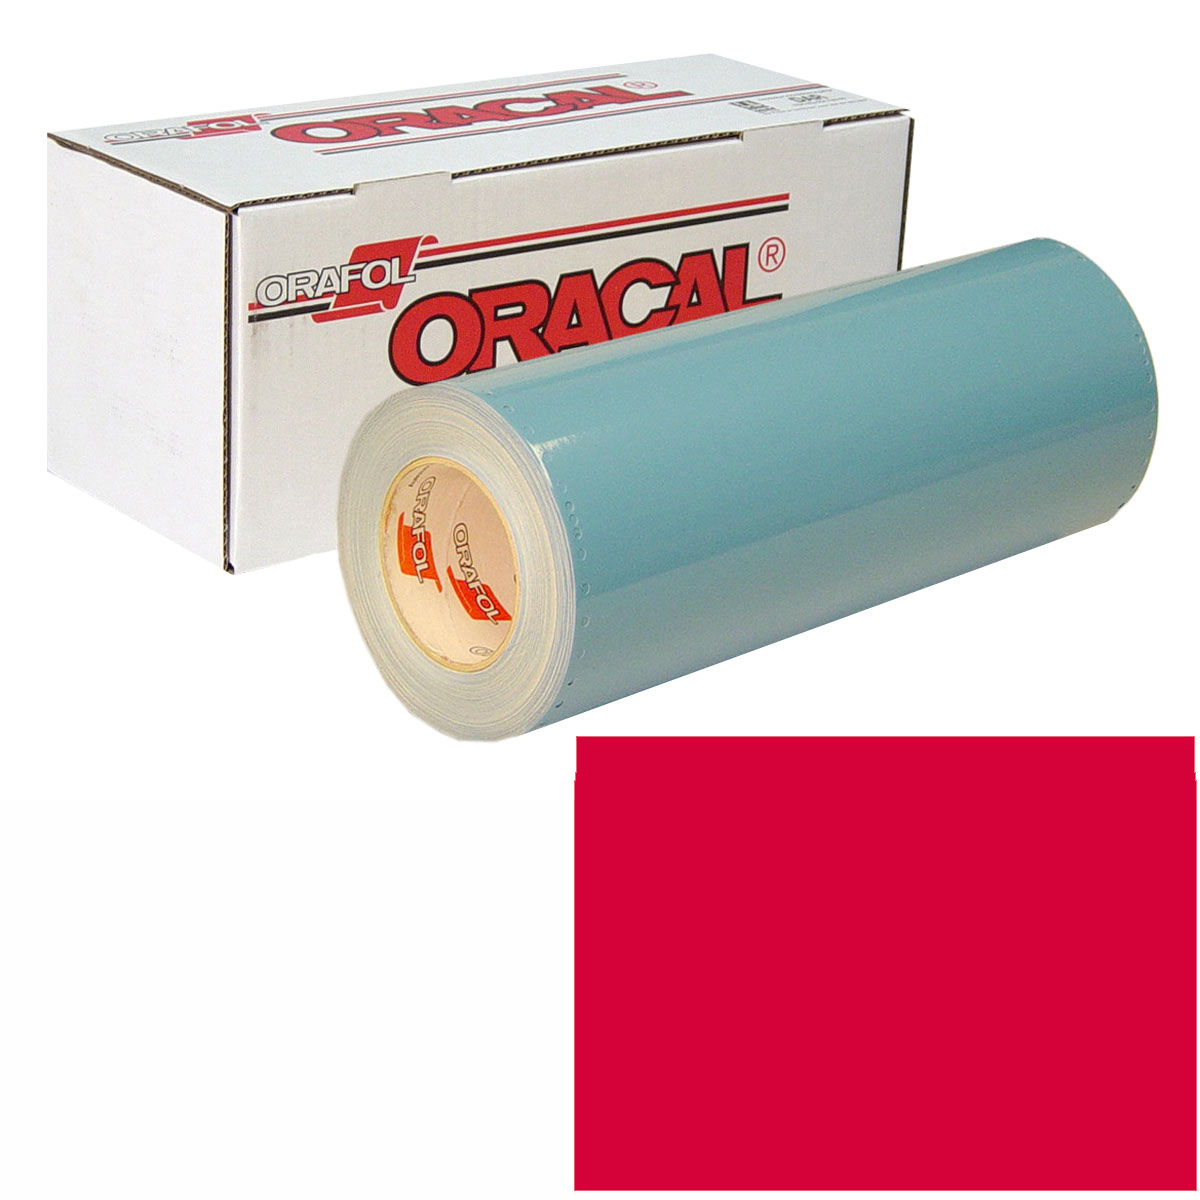 ORACAL 751 30in X 50yd 032 Light Red